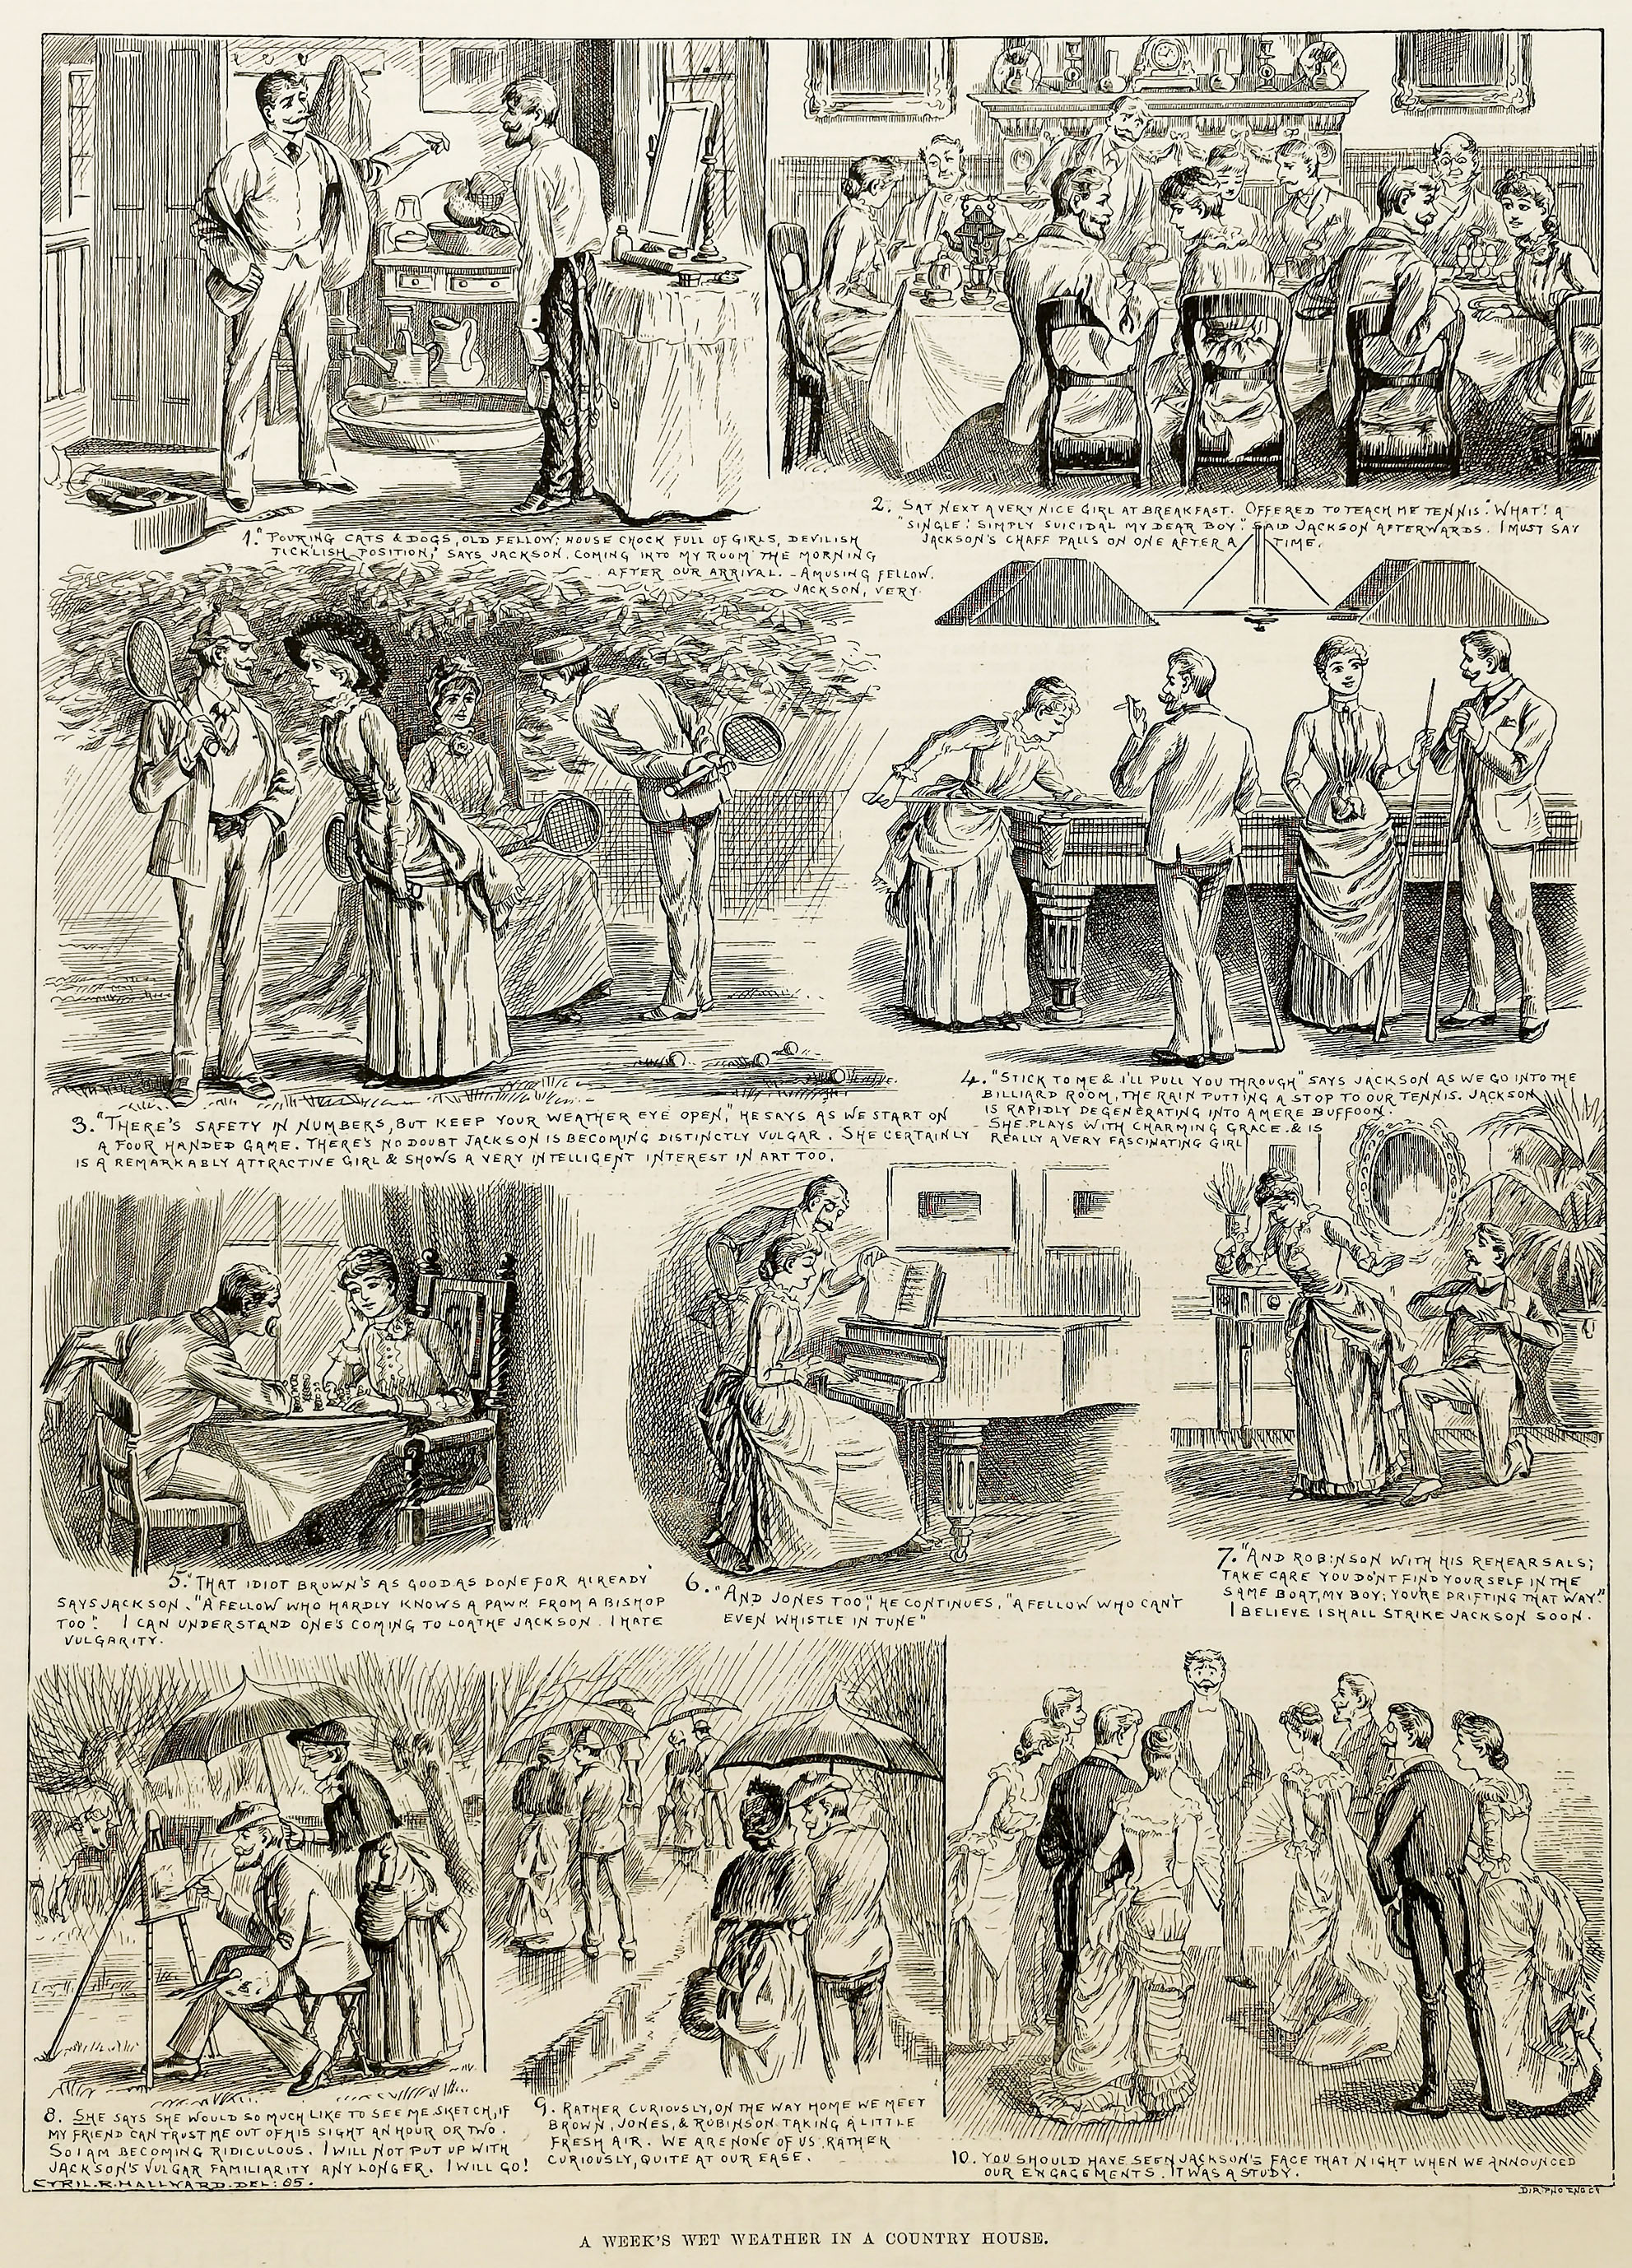 A Week's Wet Weather in a Country House. - Antique Print from 1886